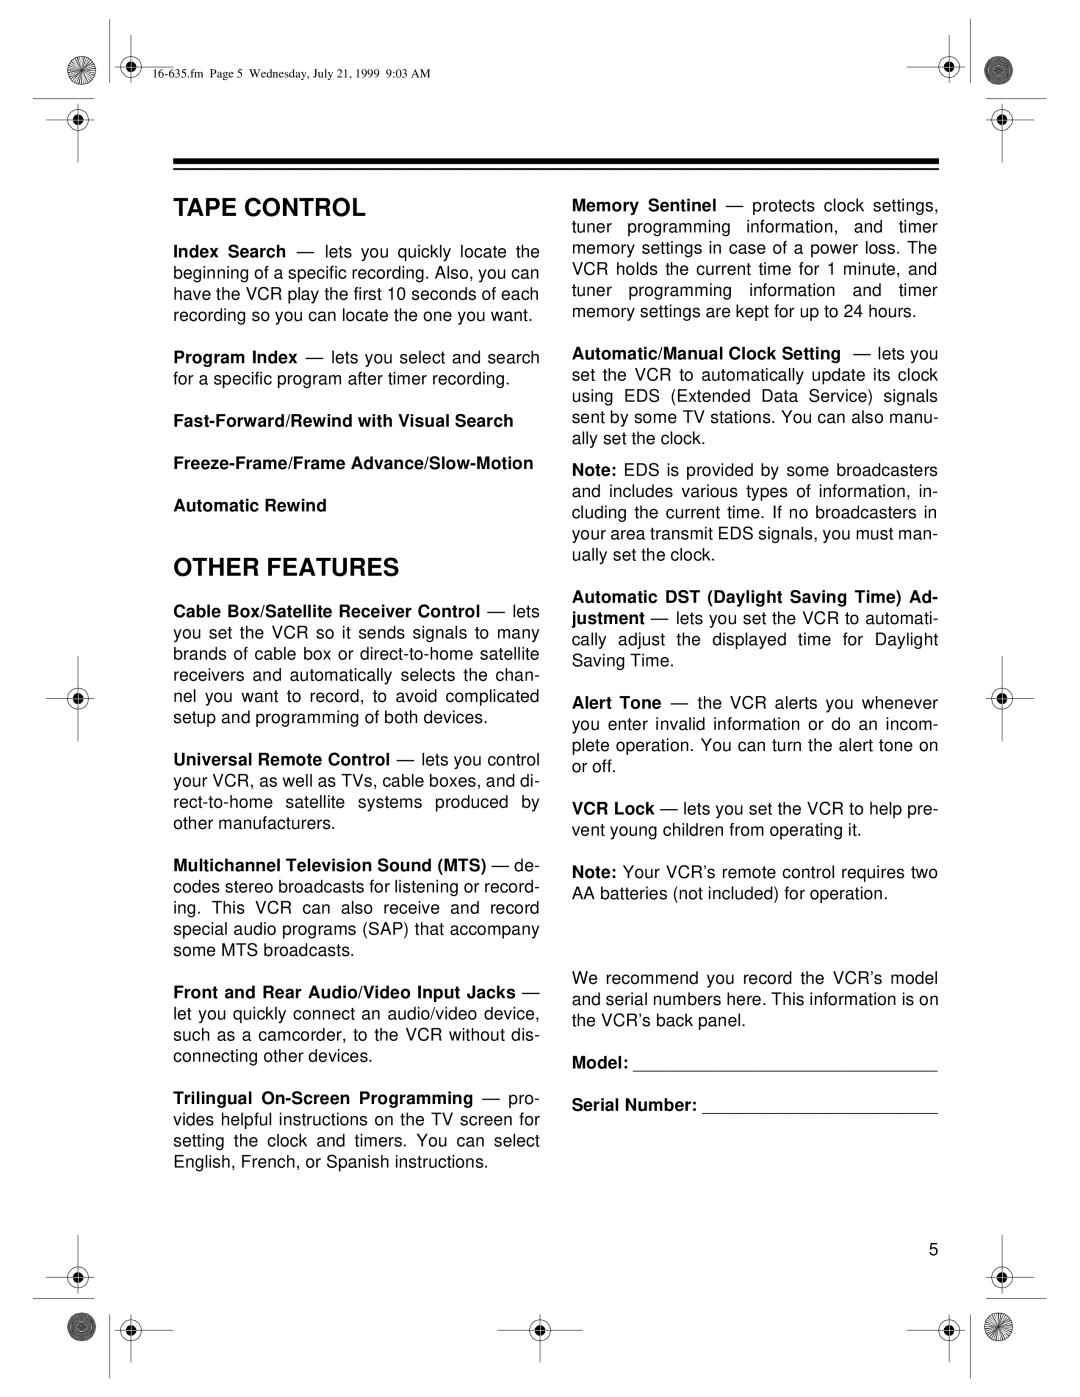 Radio Shack 66 owner manual Tape Control, Other Features 